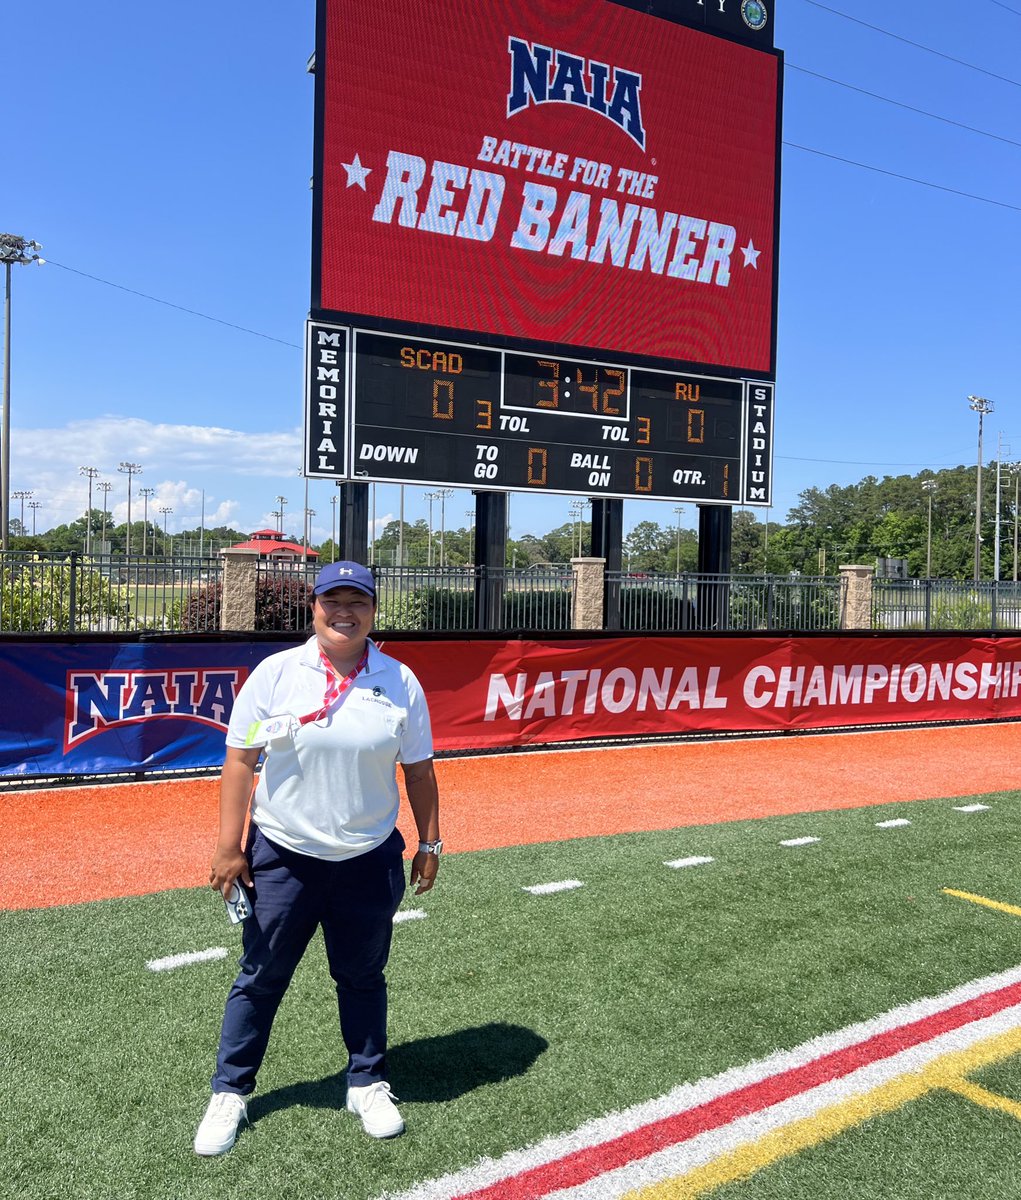 Takeaways from Savannah:

NAIA lacrosse shines — don't overlook it. 

Student-athletes showed unmatched grit, talent, & tenacity.

The NAIA women’s lacrosse community is tight-knit. Proud of my coaching peers in leading their teams to Nationals. 

#NAIAWLAX